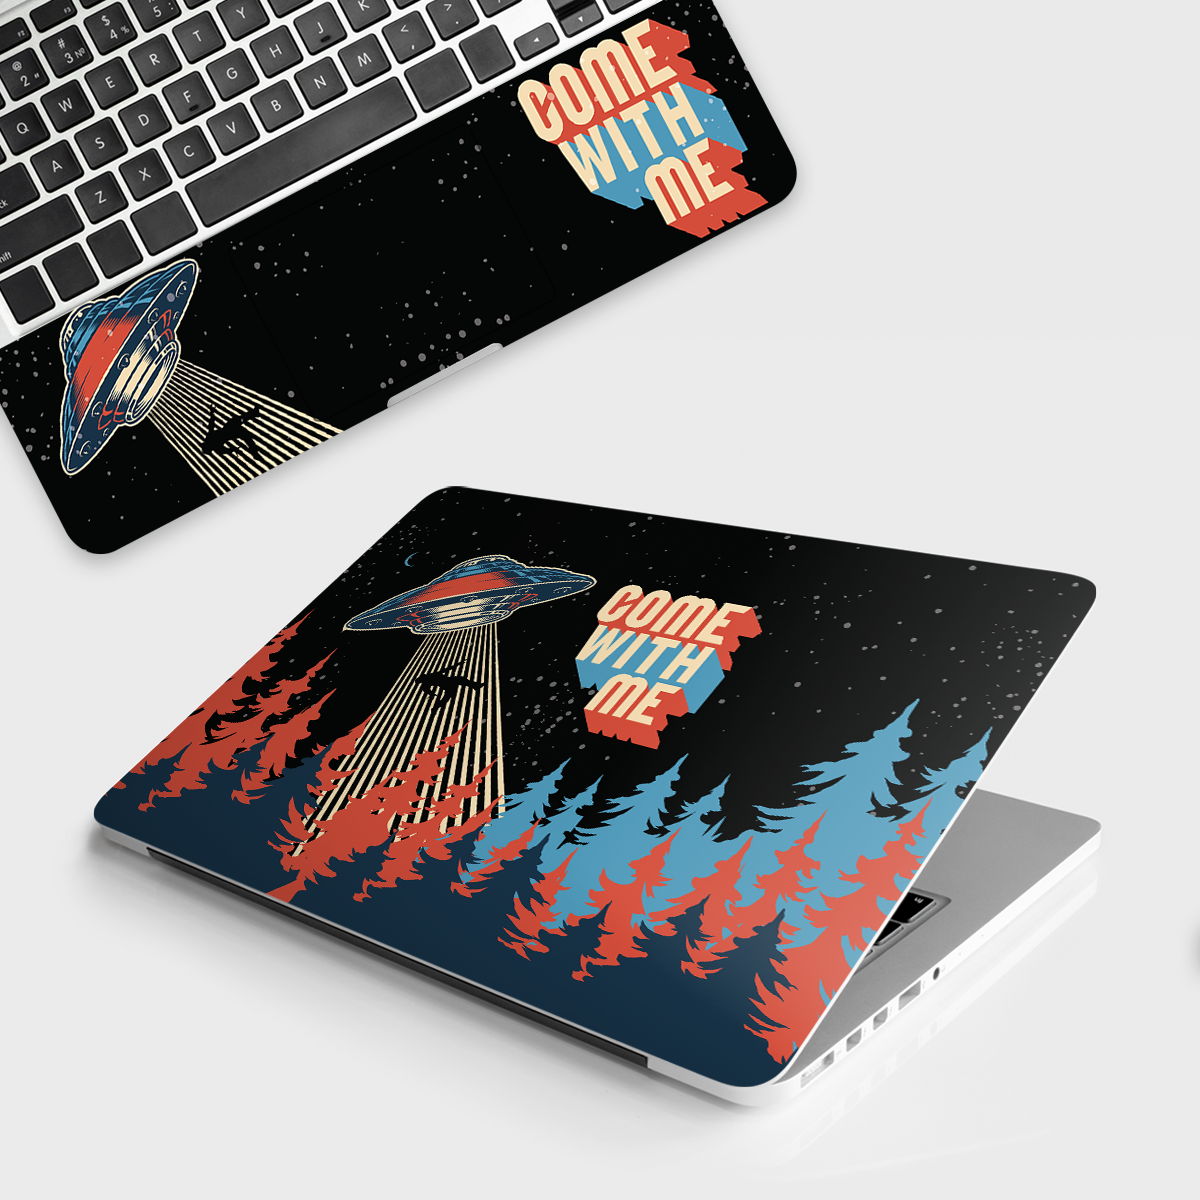 Fomo Store Laptop Skins Miscellaneous Come With Me